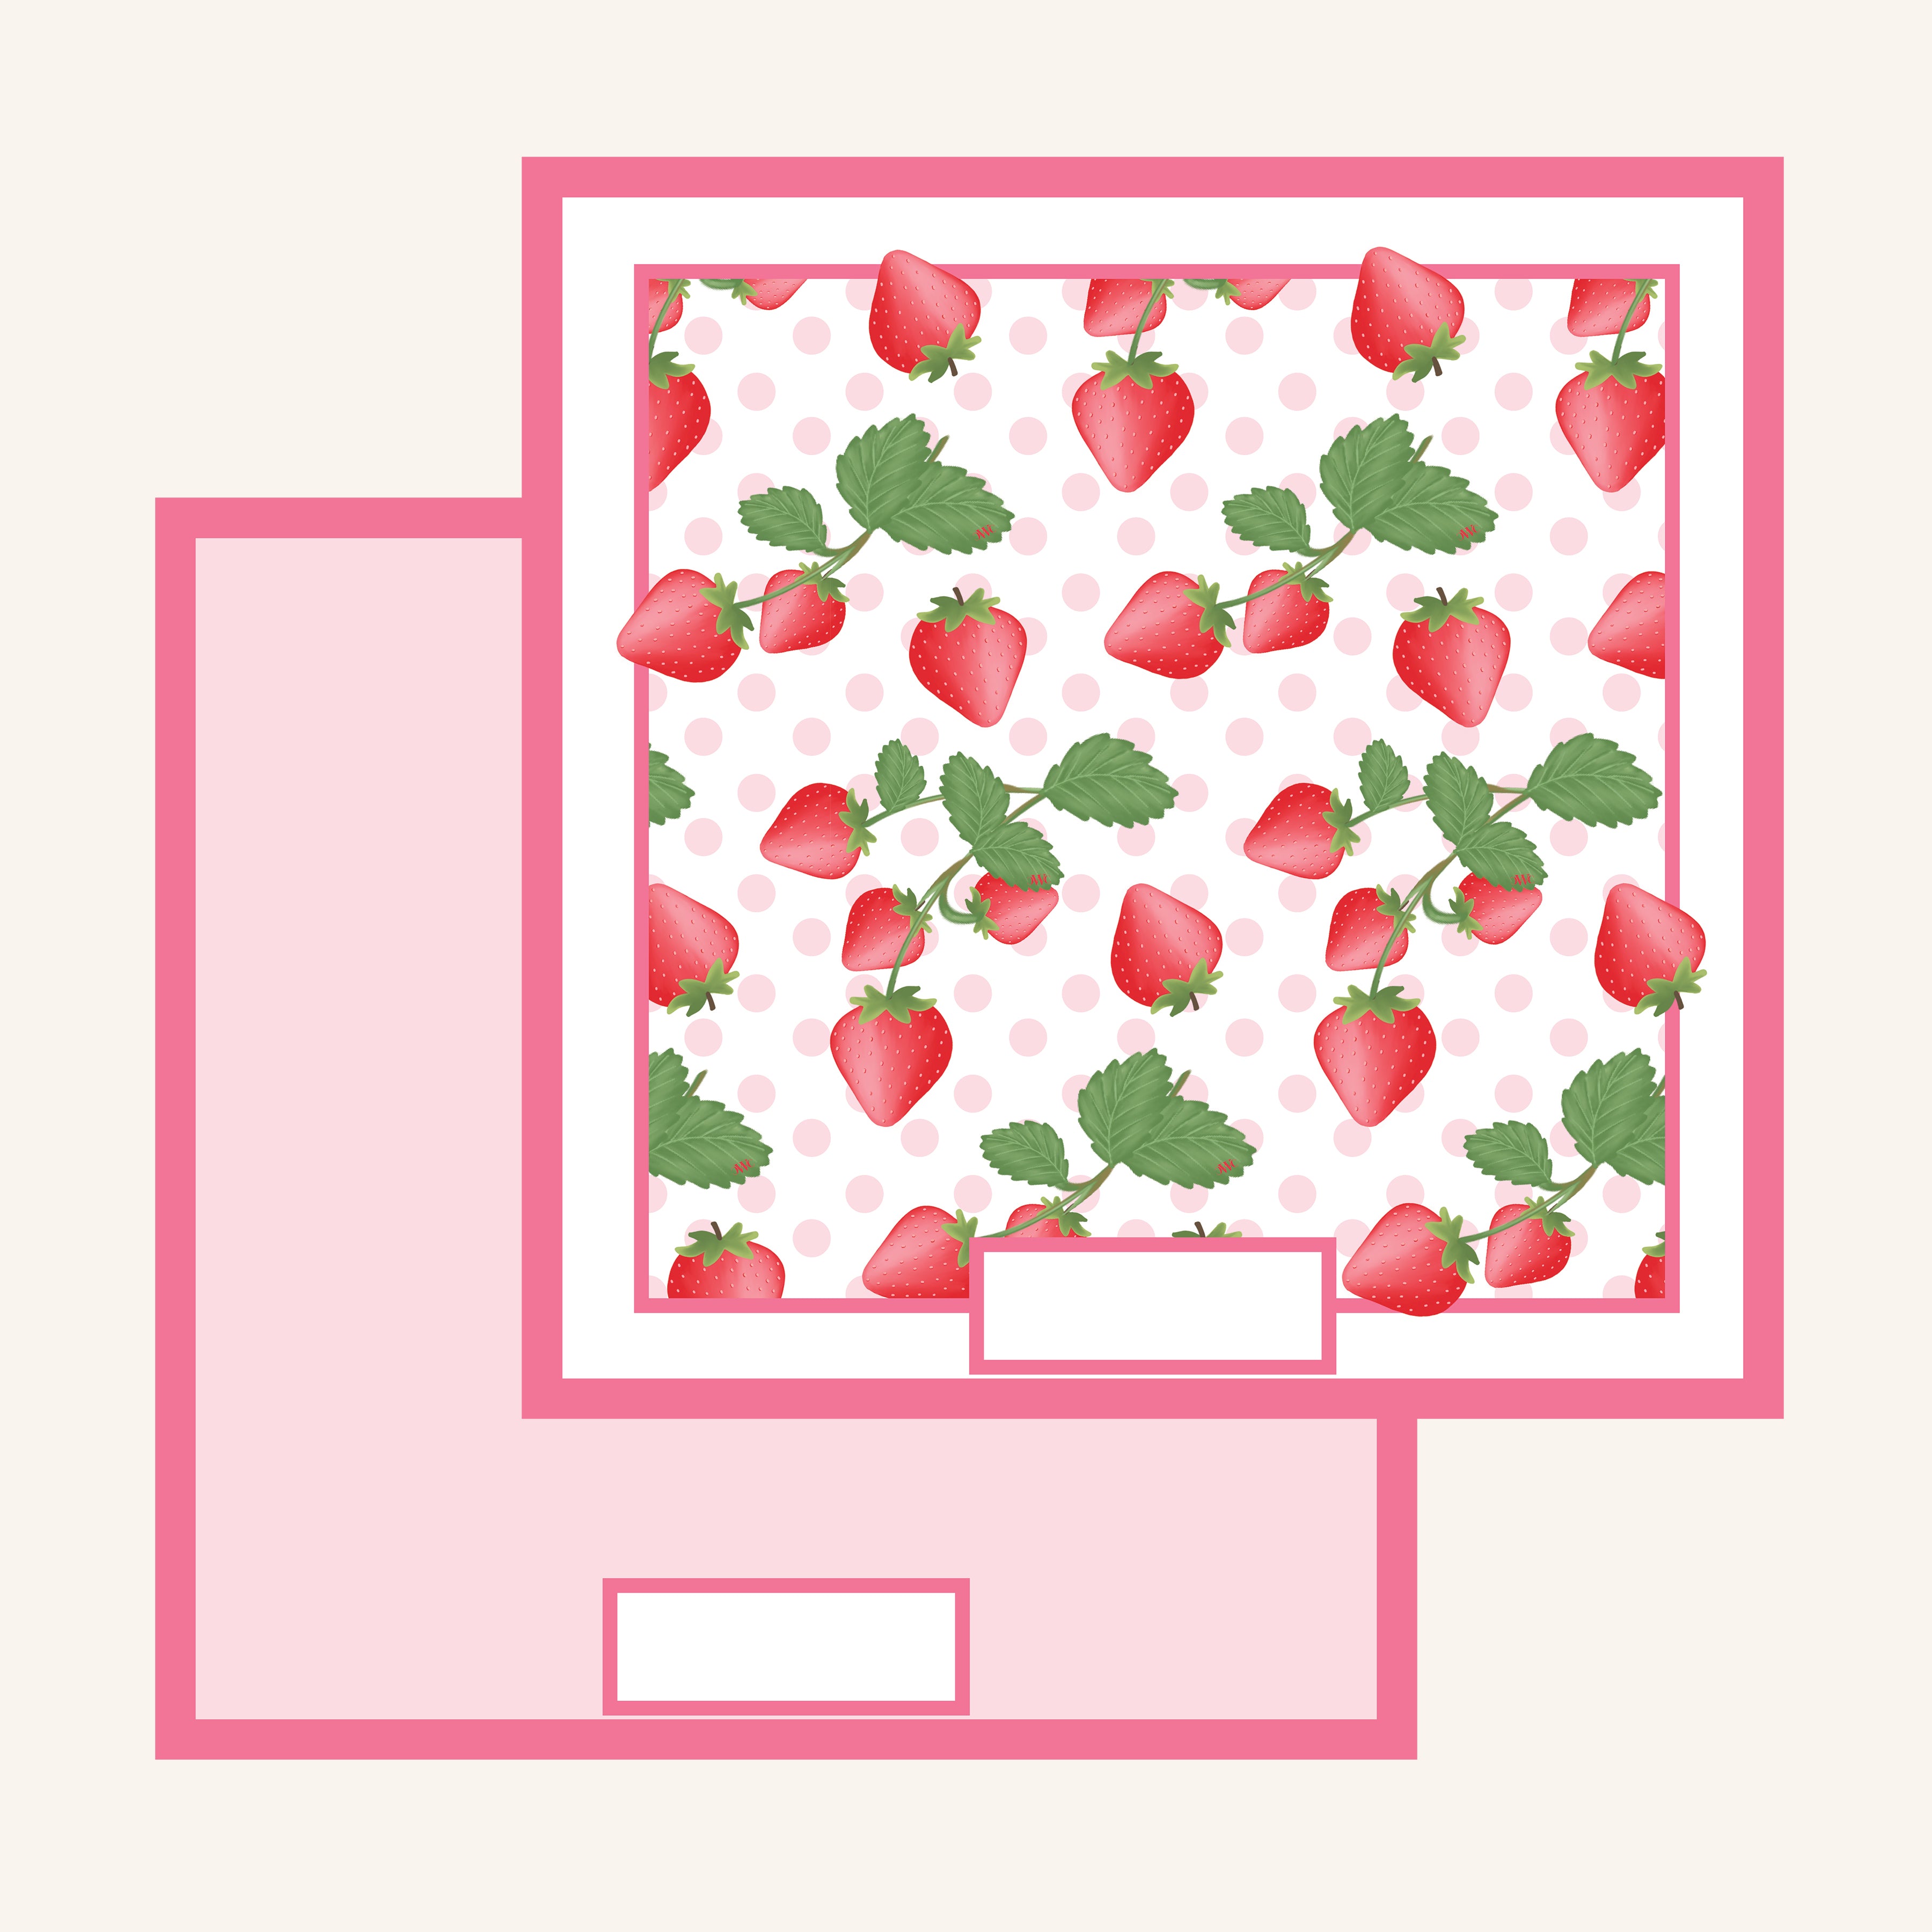 Victoire Sunnyvale Strawberry Placemats, Set of 12